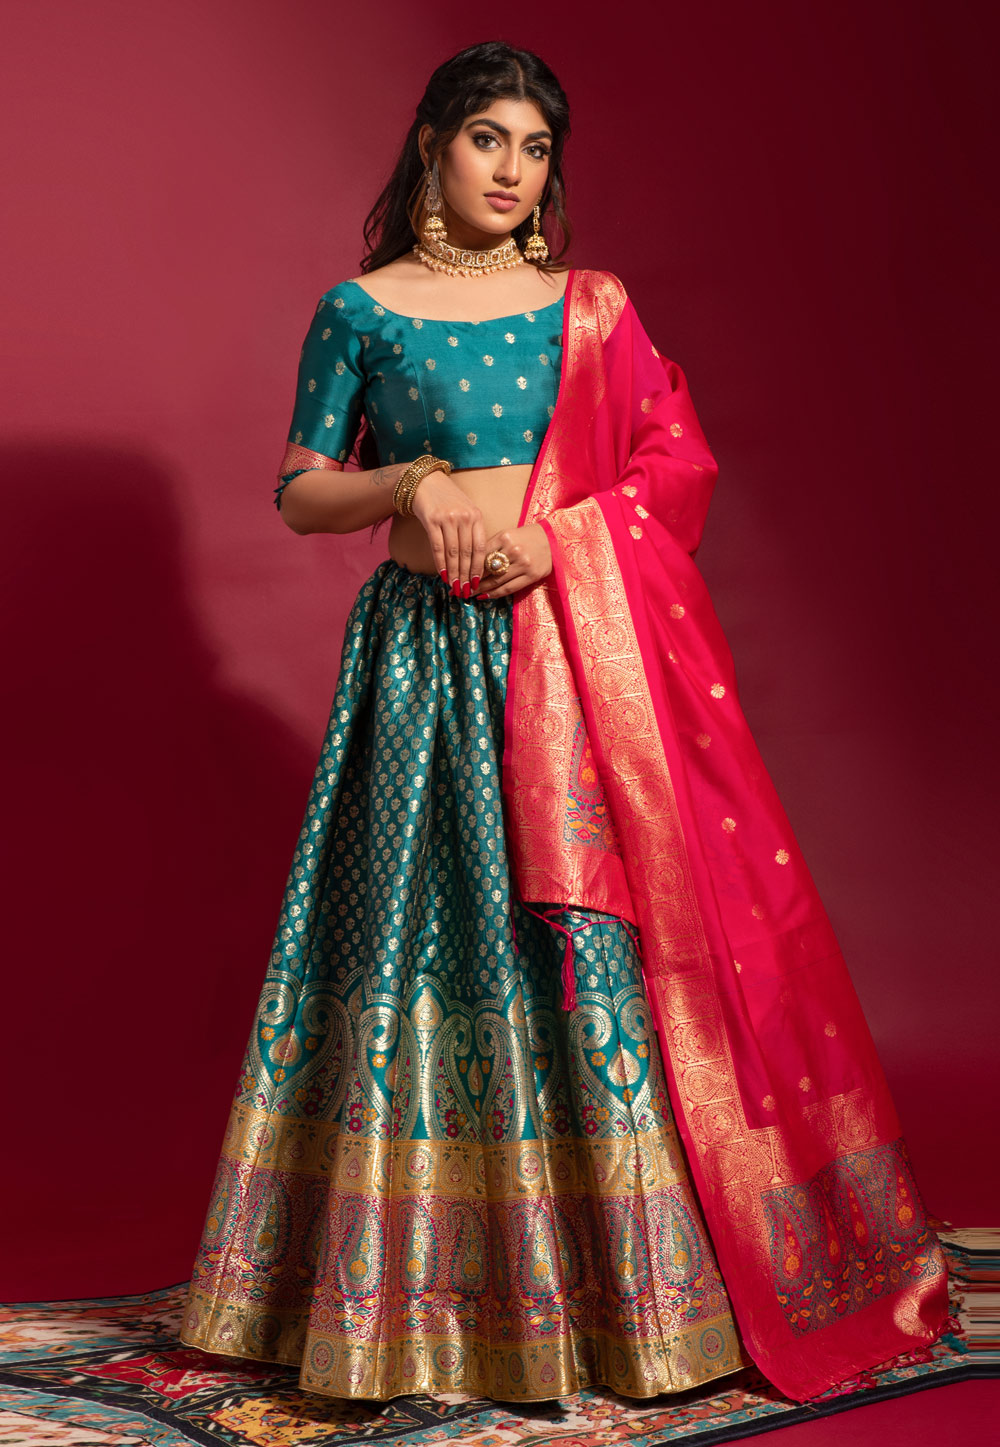 30 Banarasi Lehenga Images which will make you opt for one this